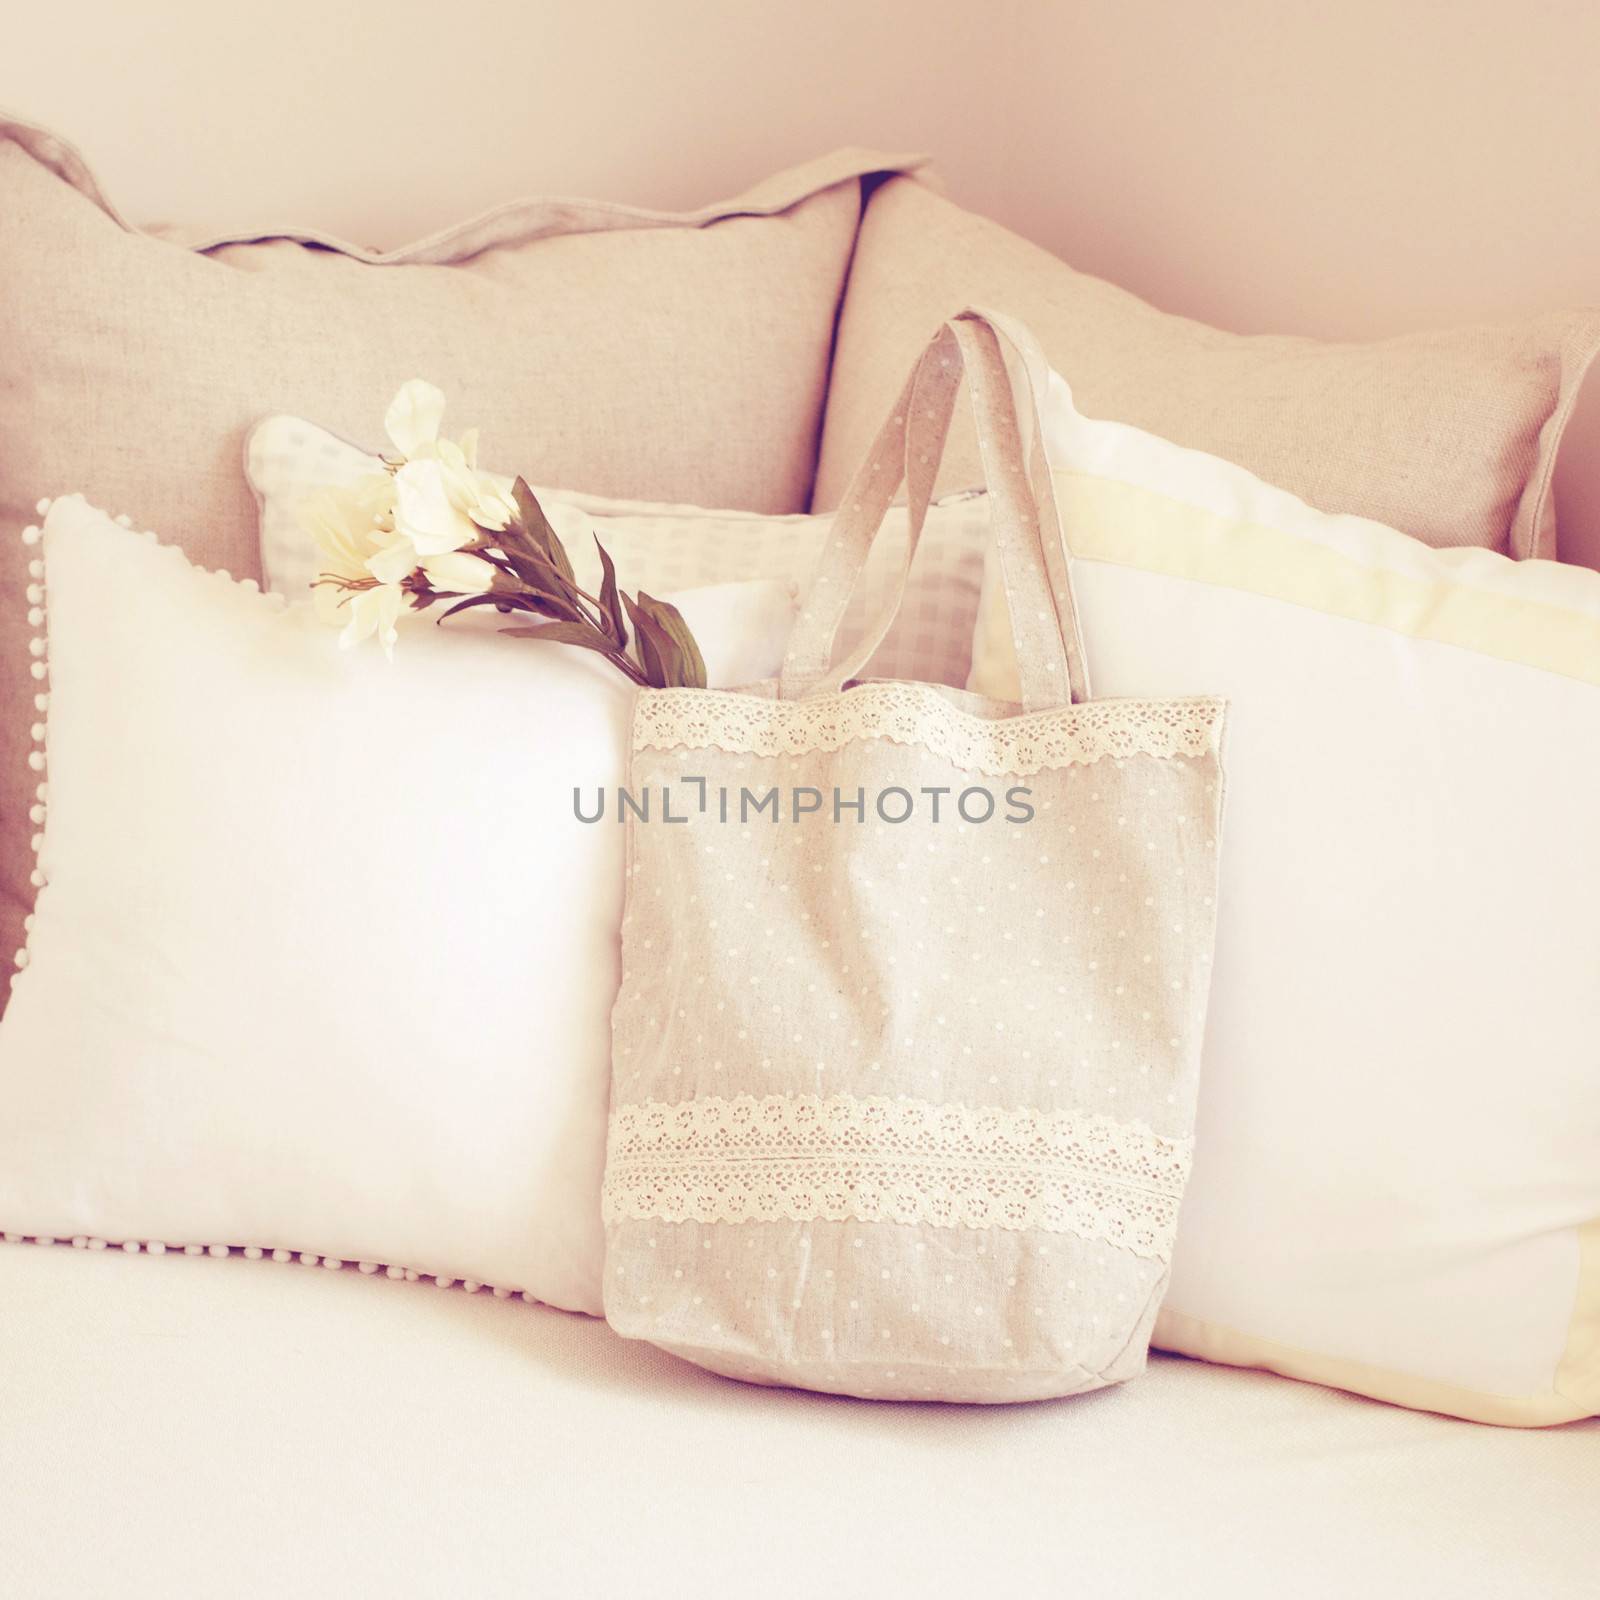 Cute tote bag and pillows on bed with retro filter effect